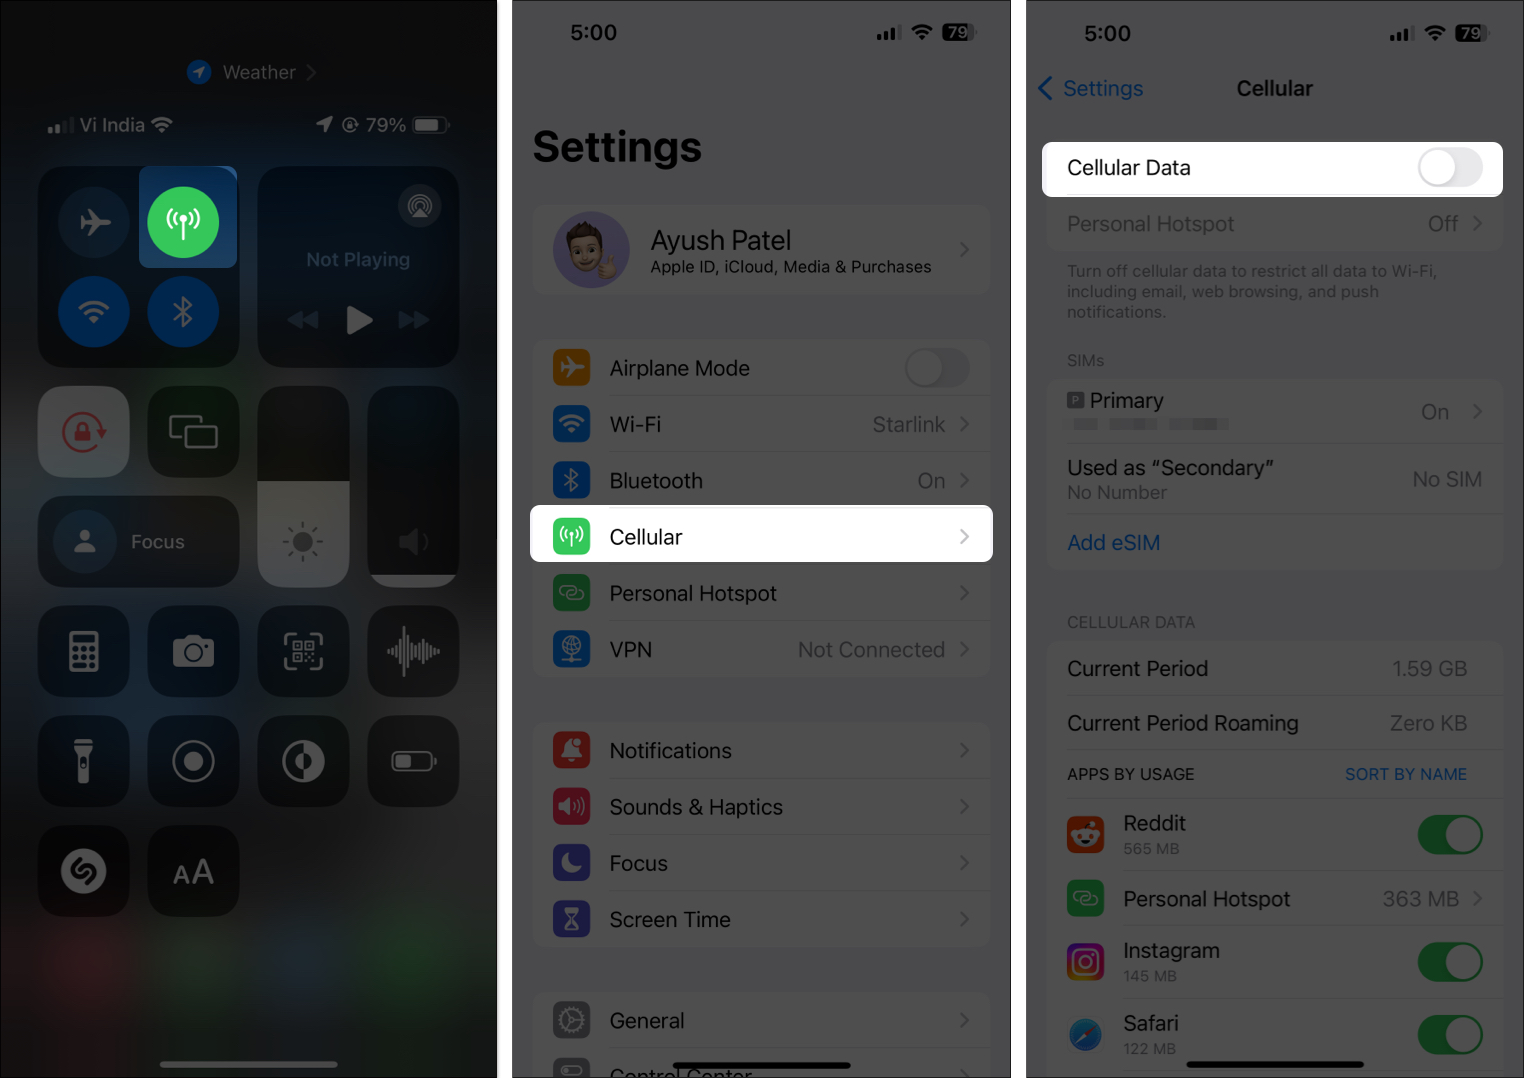 Turn off cellular data from control center or from settings